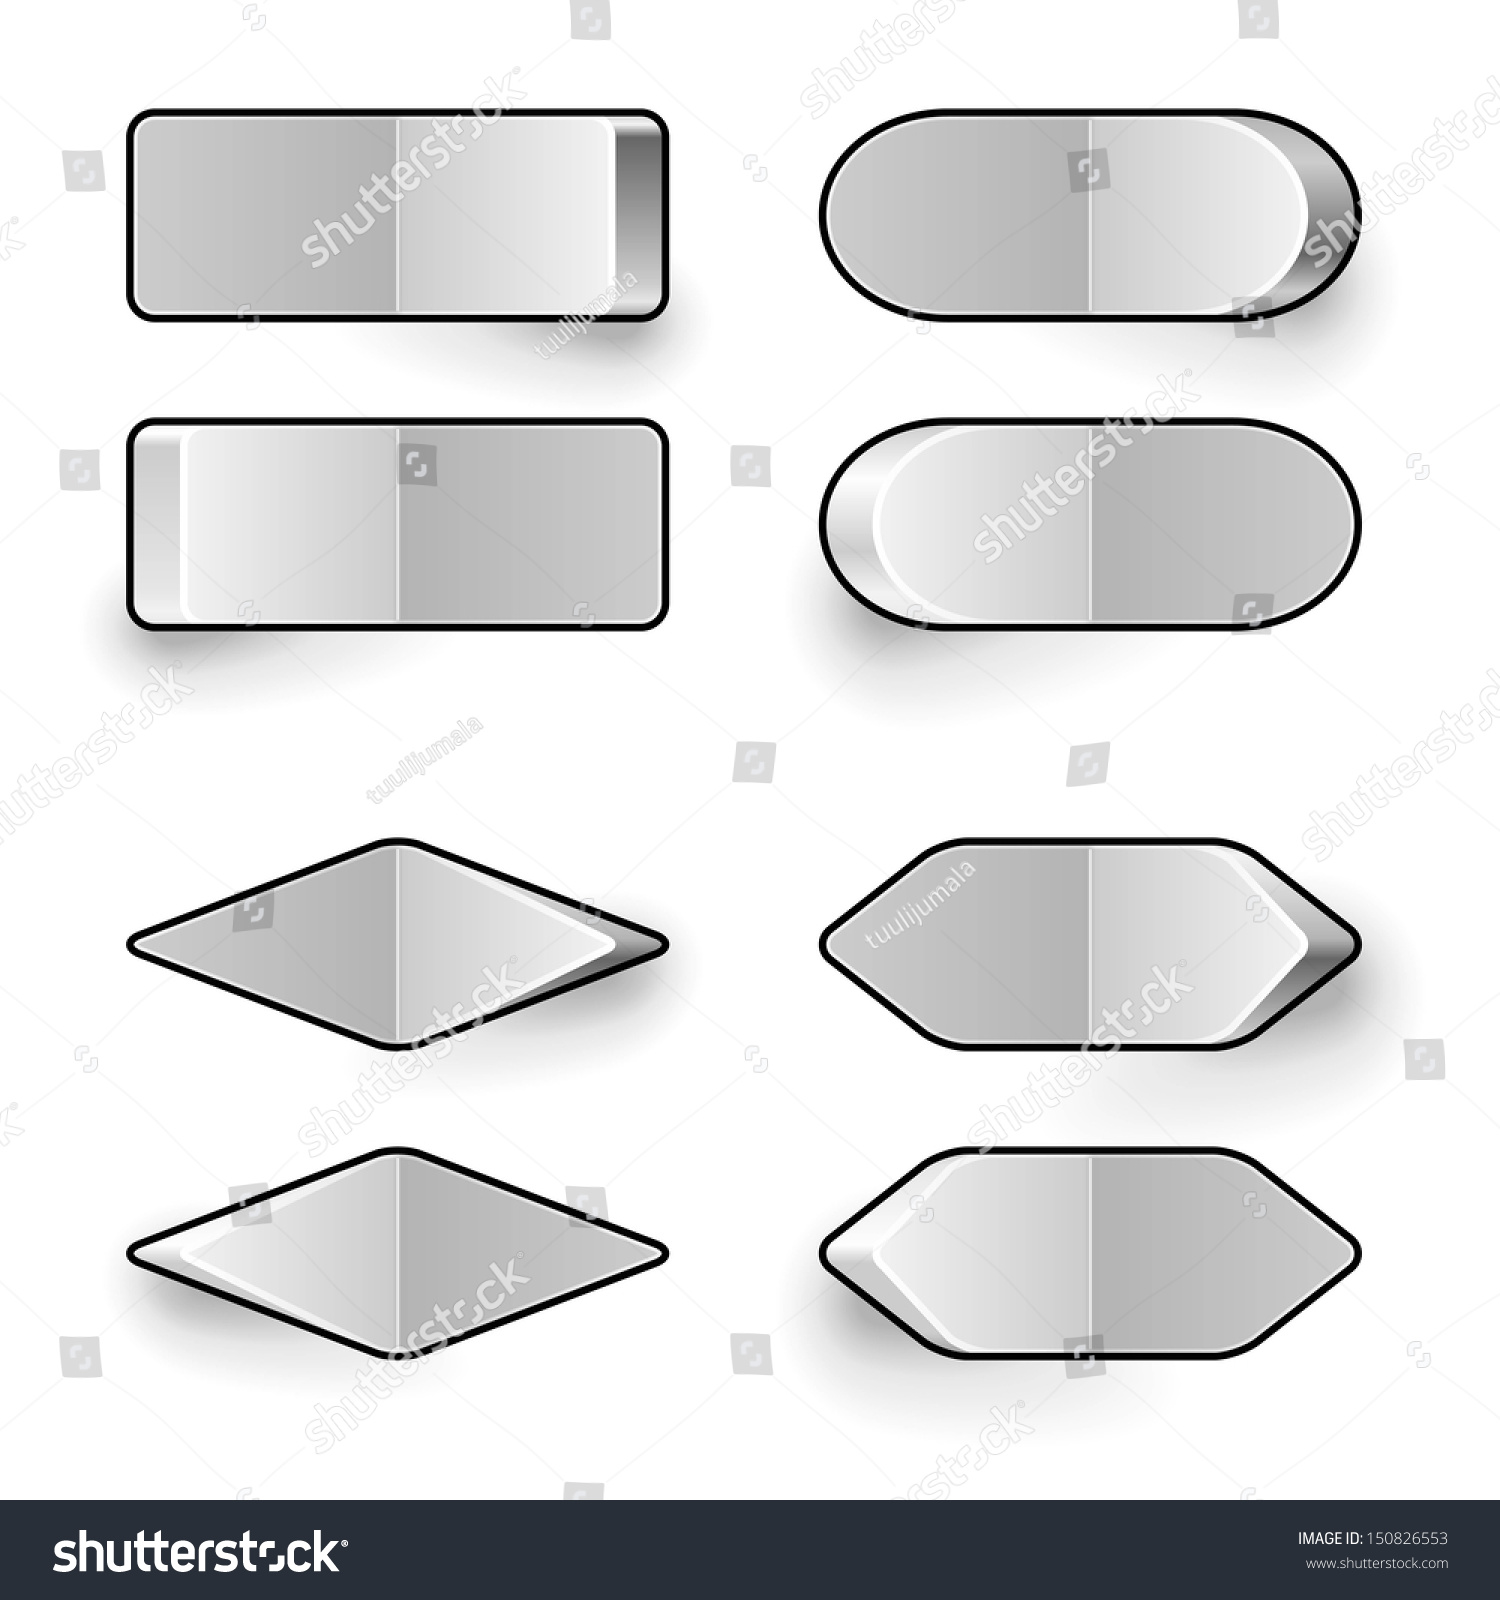 Blank White Toggle Switch Vector Template. - 150826553 : Shutterstock